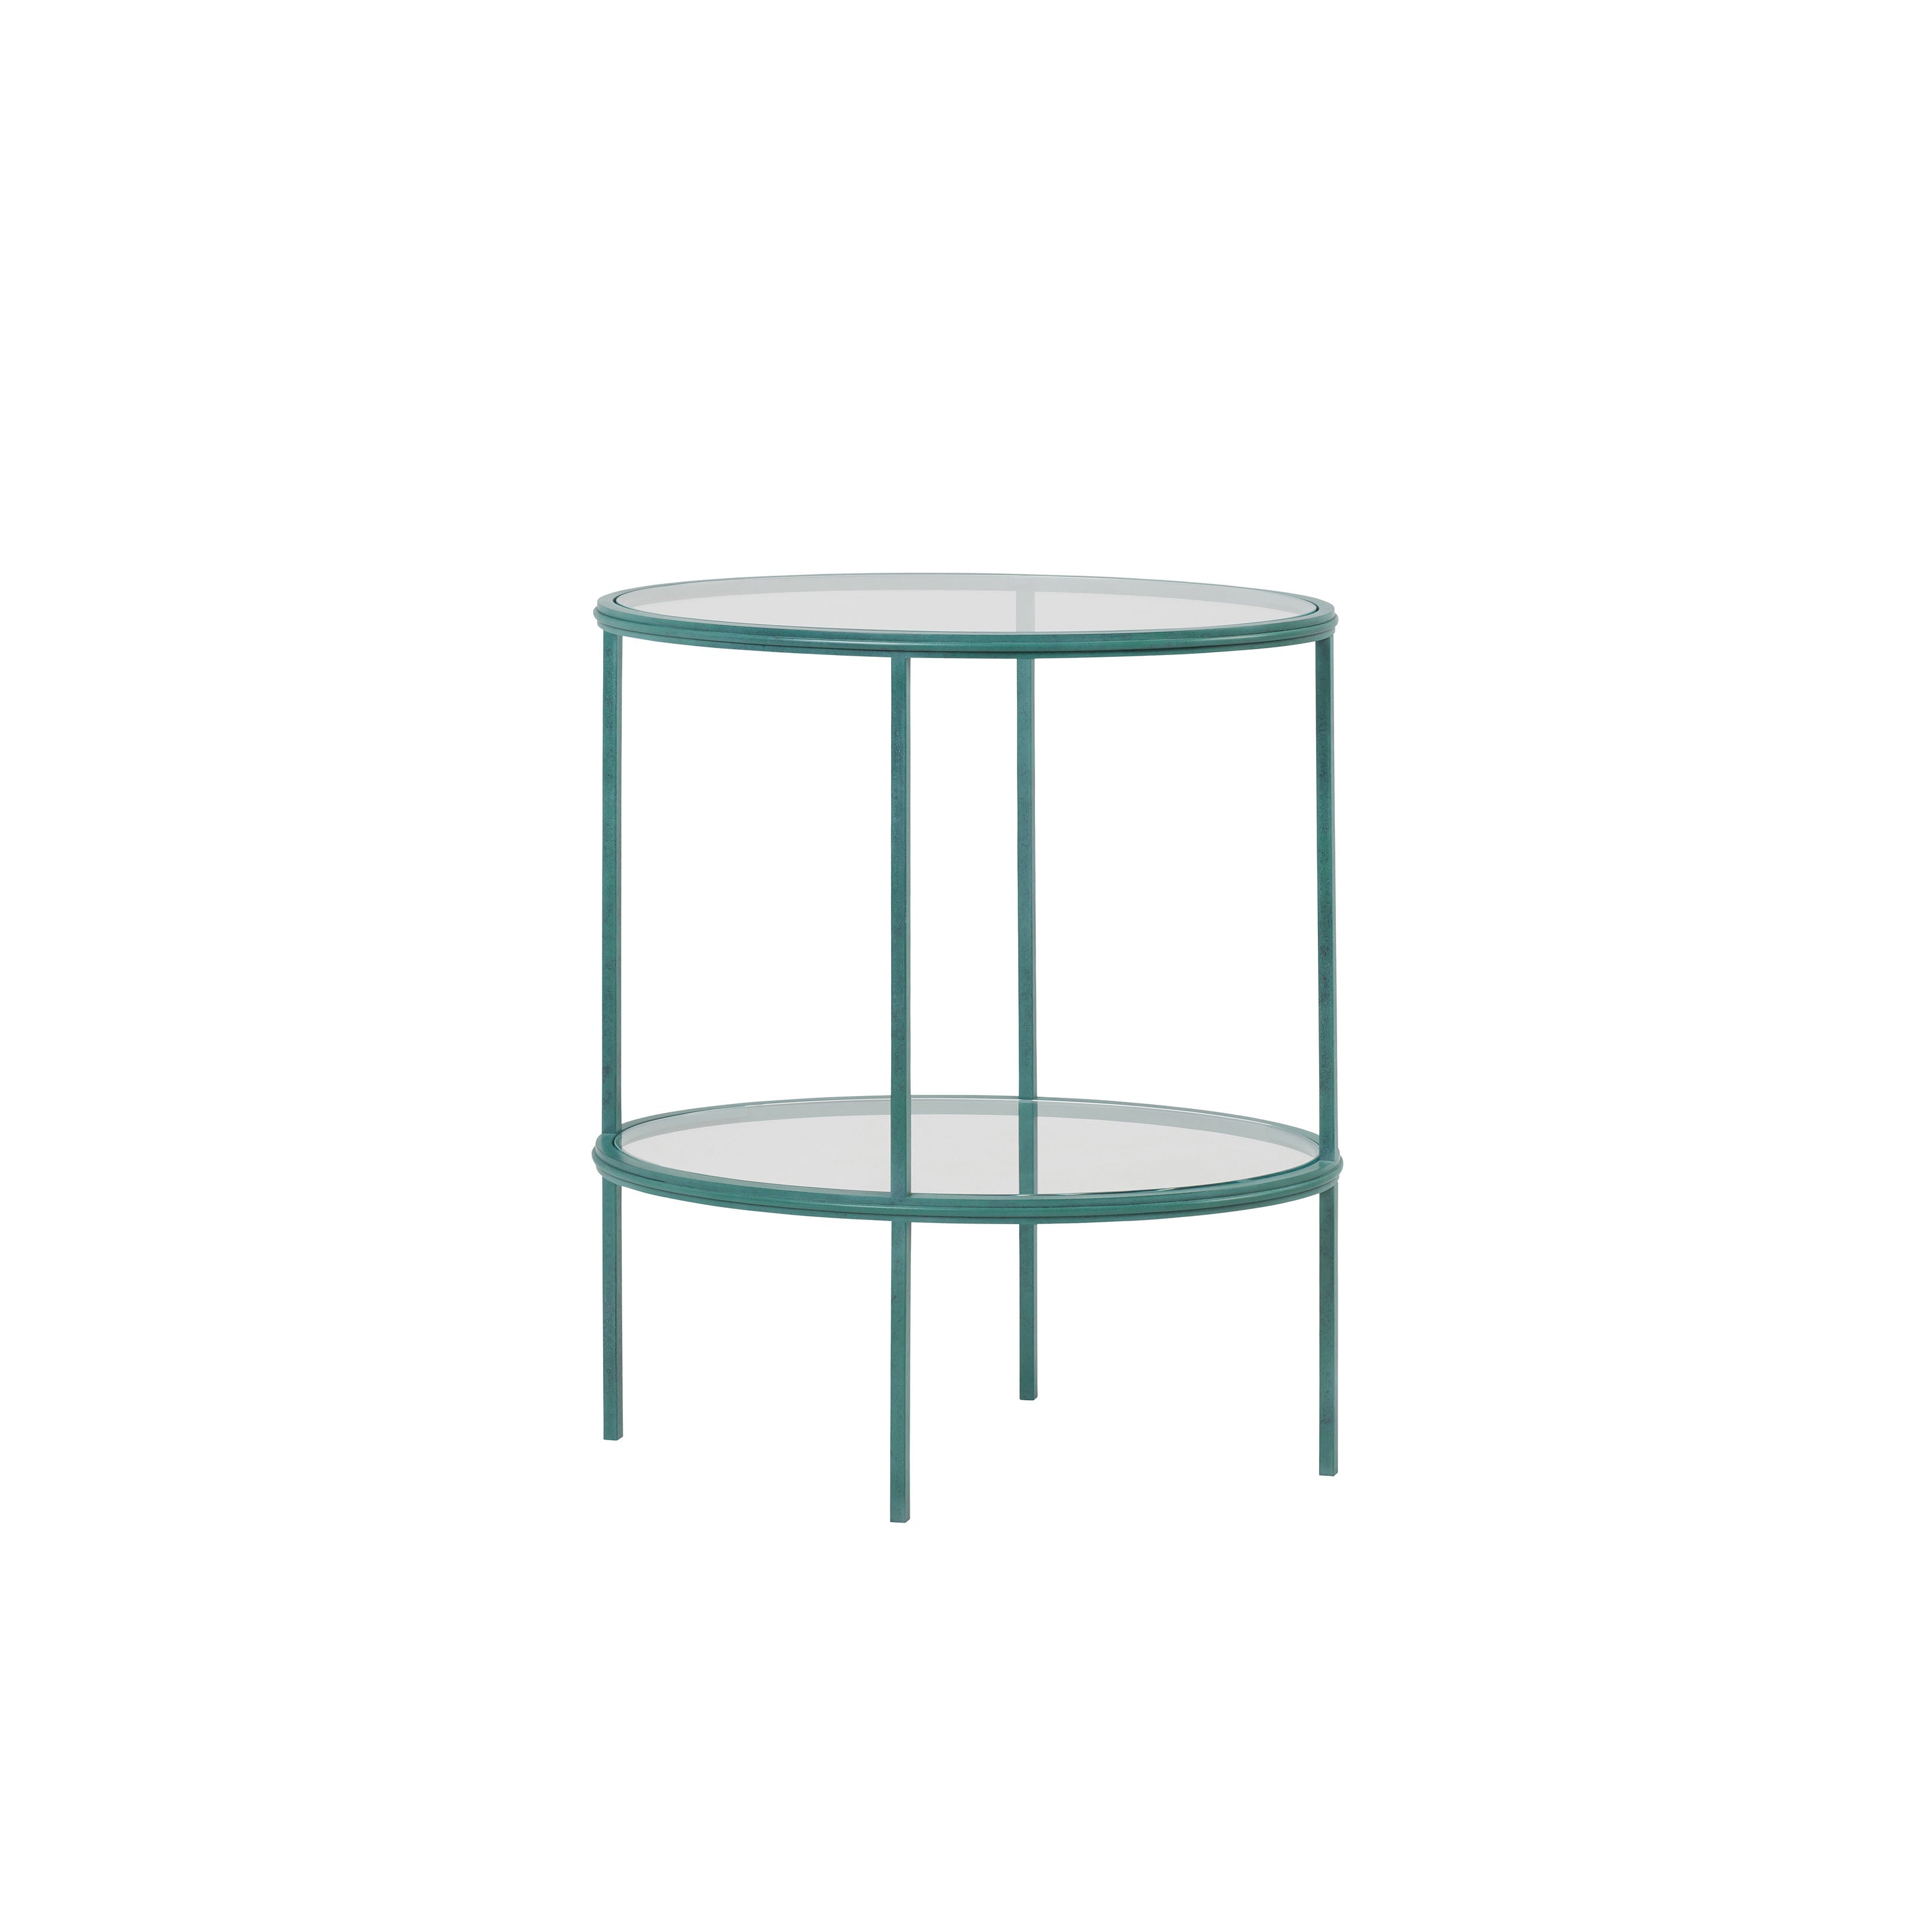 Nina Campbell Grace End Table in Verdigris